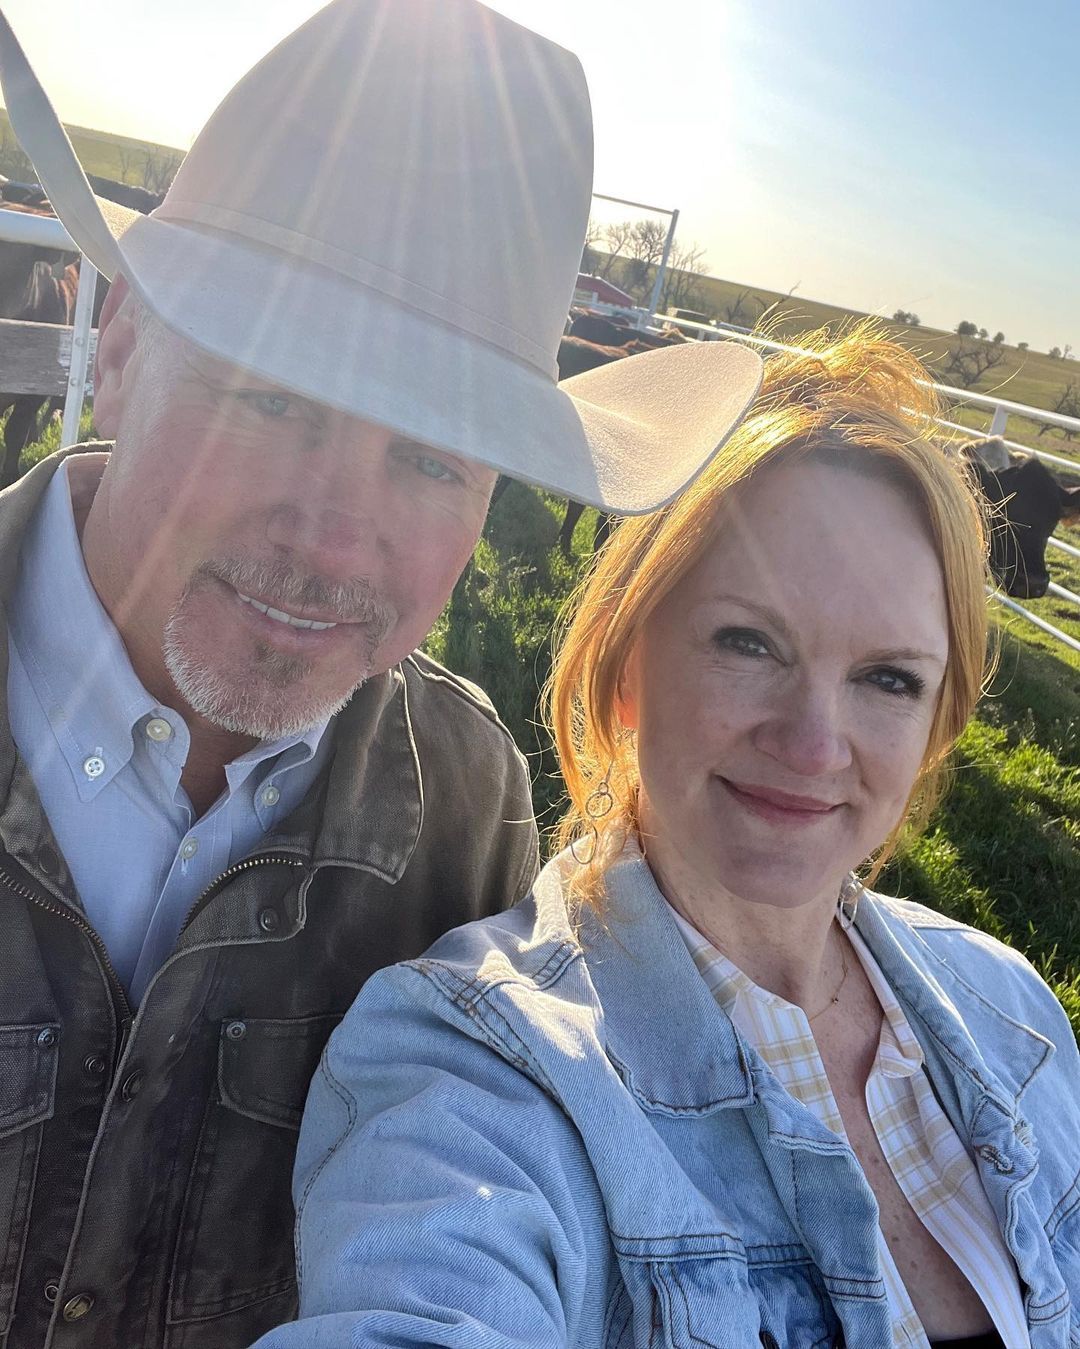 Ree Drummond Shows What Life Is Like in an Empty Nest